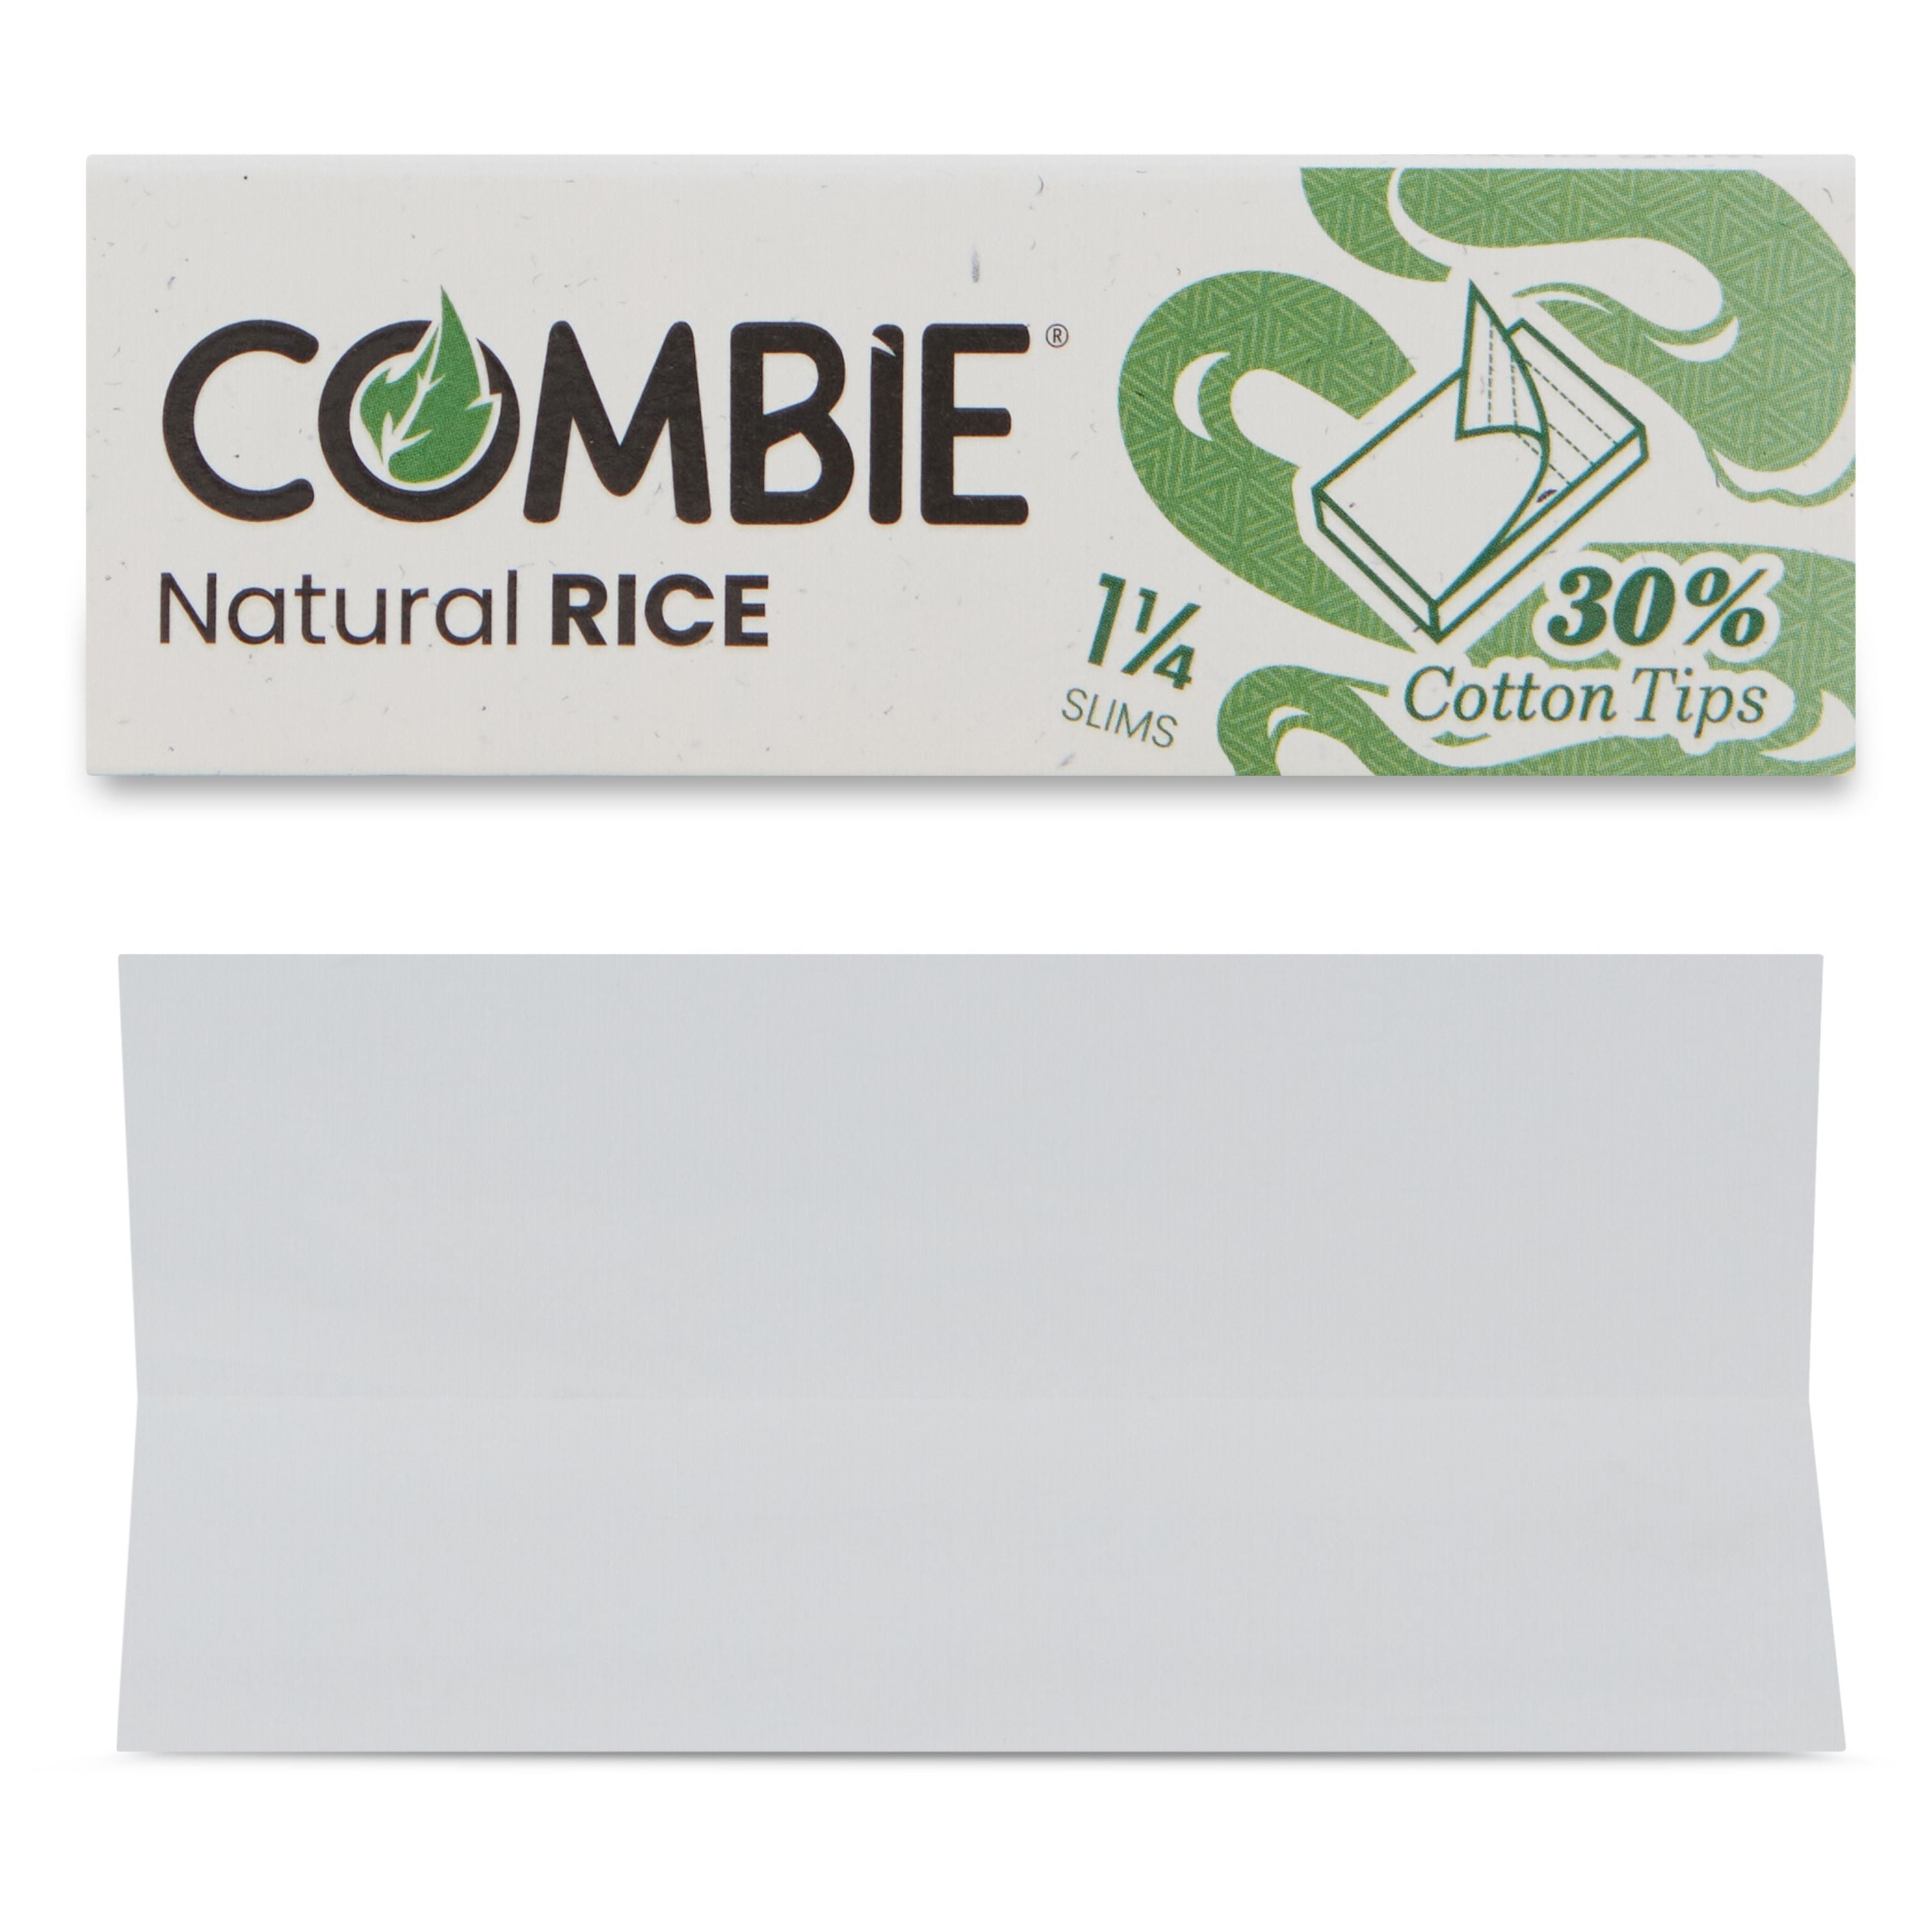 1-1/4 NATURAL RICE ROLLING PAPERS - 5 packs